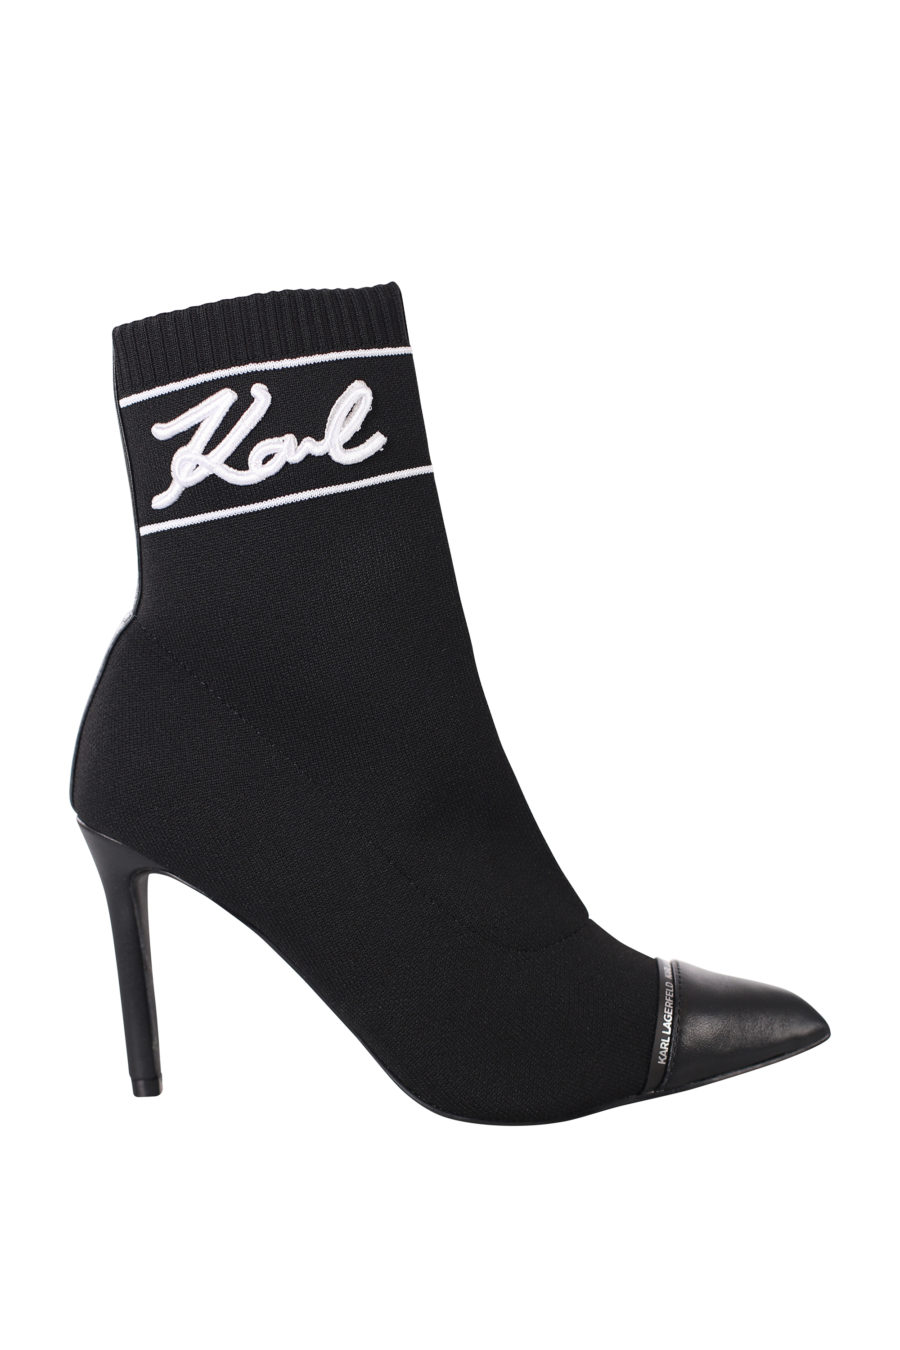 Black ankle sock ankle boots with white logo - IMG 0391